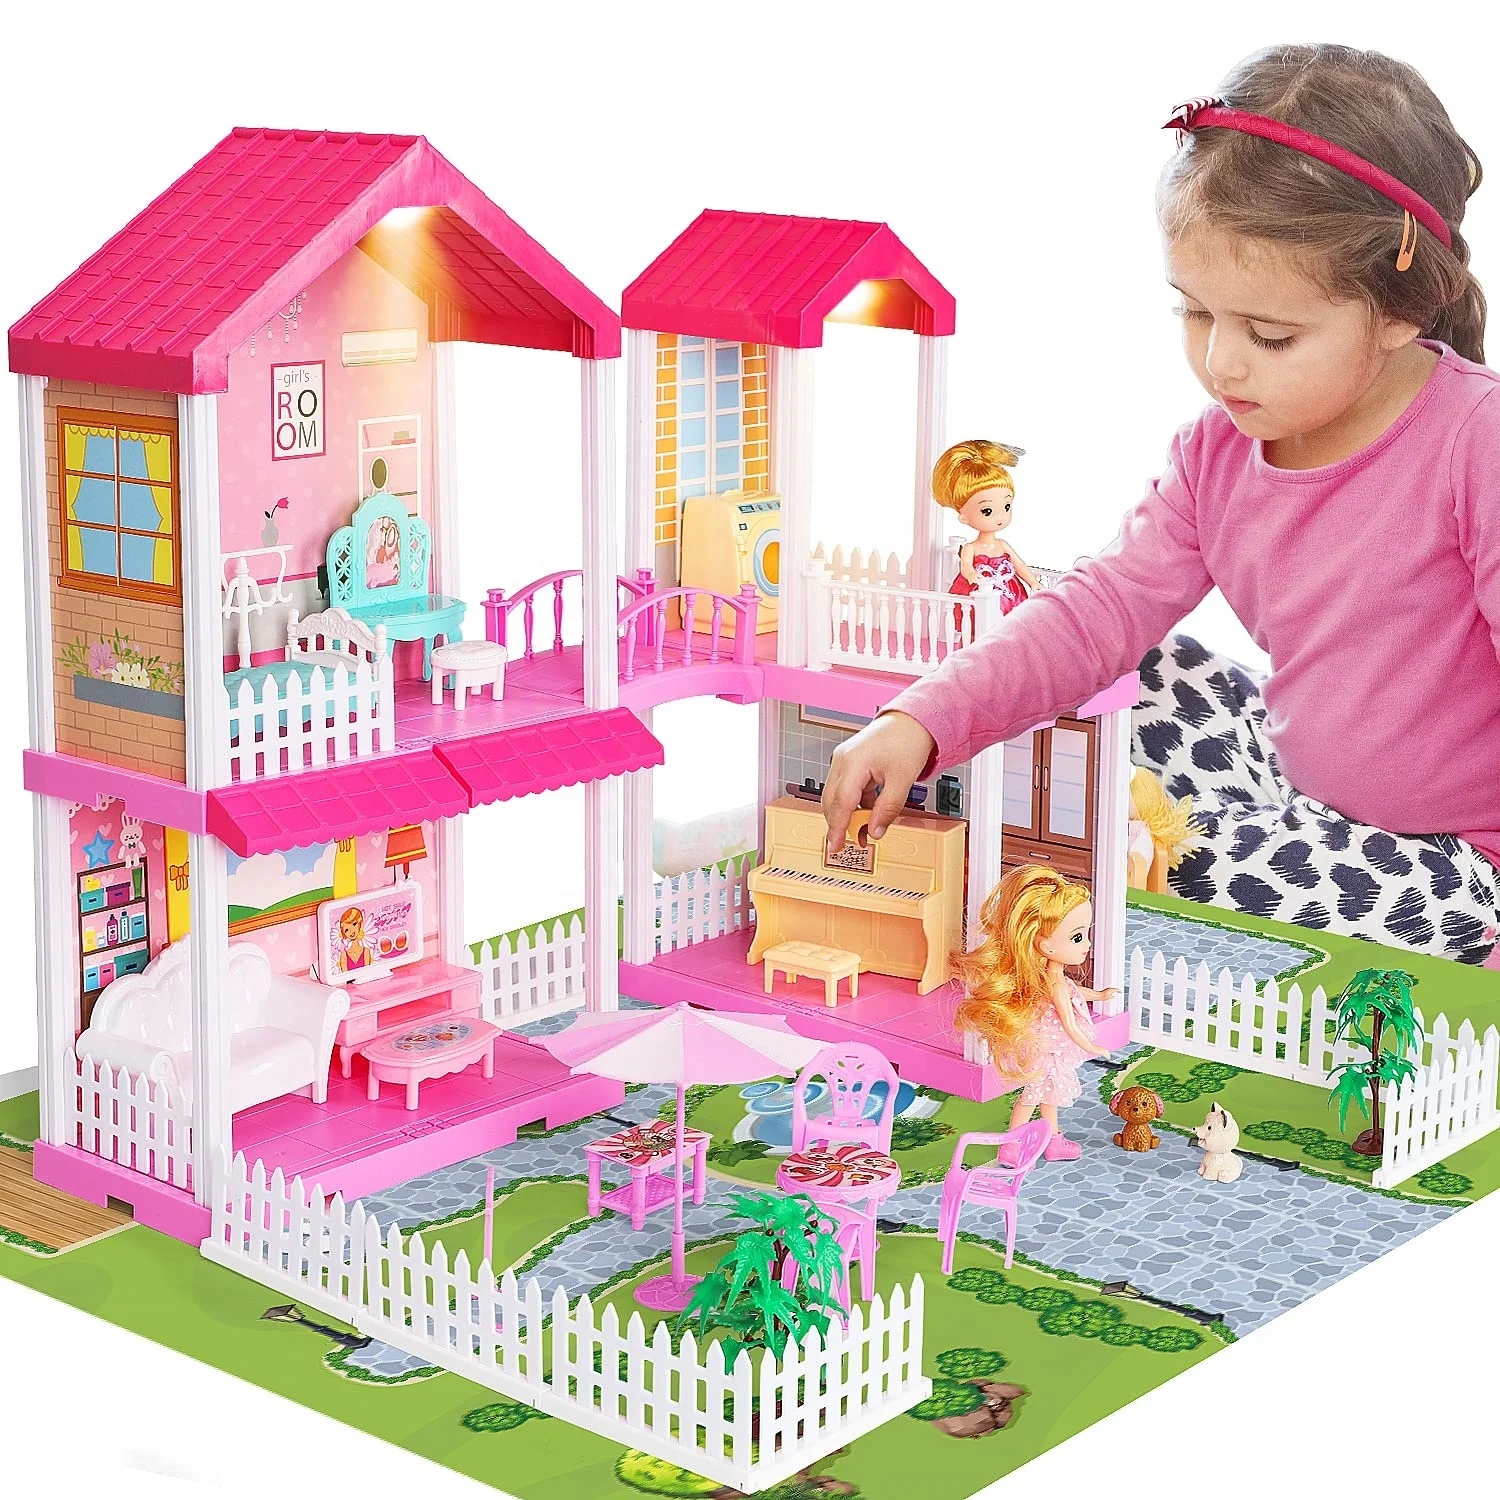 

(Only for US customers) TOY Life Princess Accessories Furniture Light DIY Assembly Villa Plastic Big Pink Doll House with Map